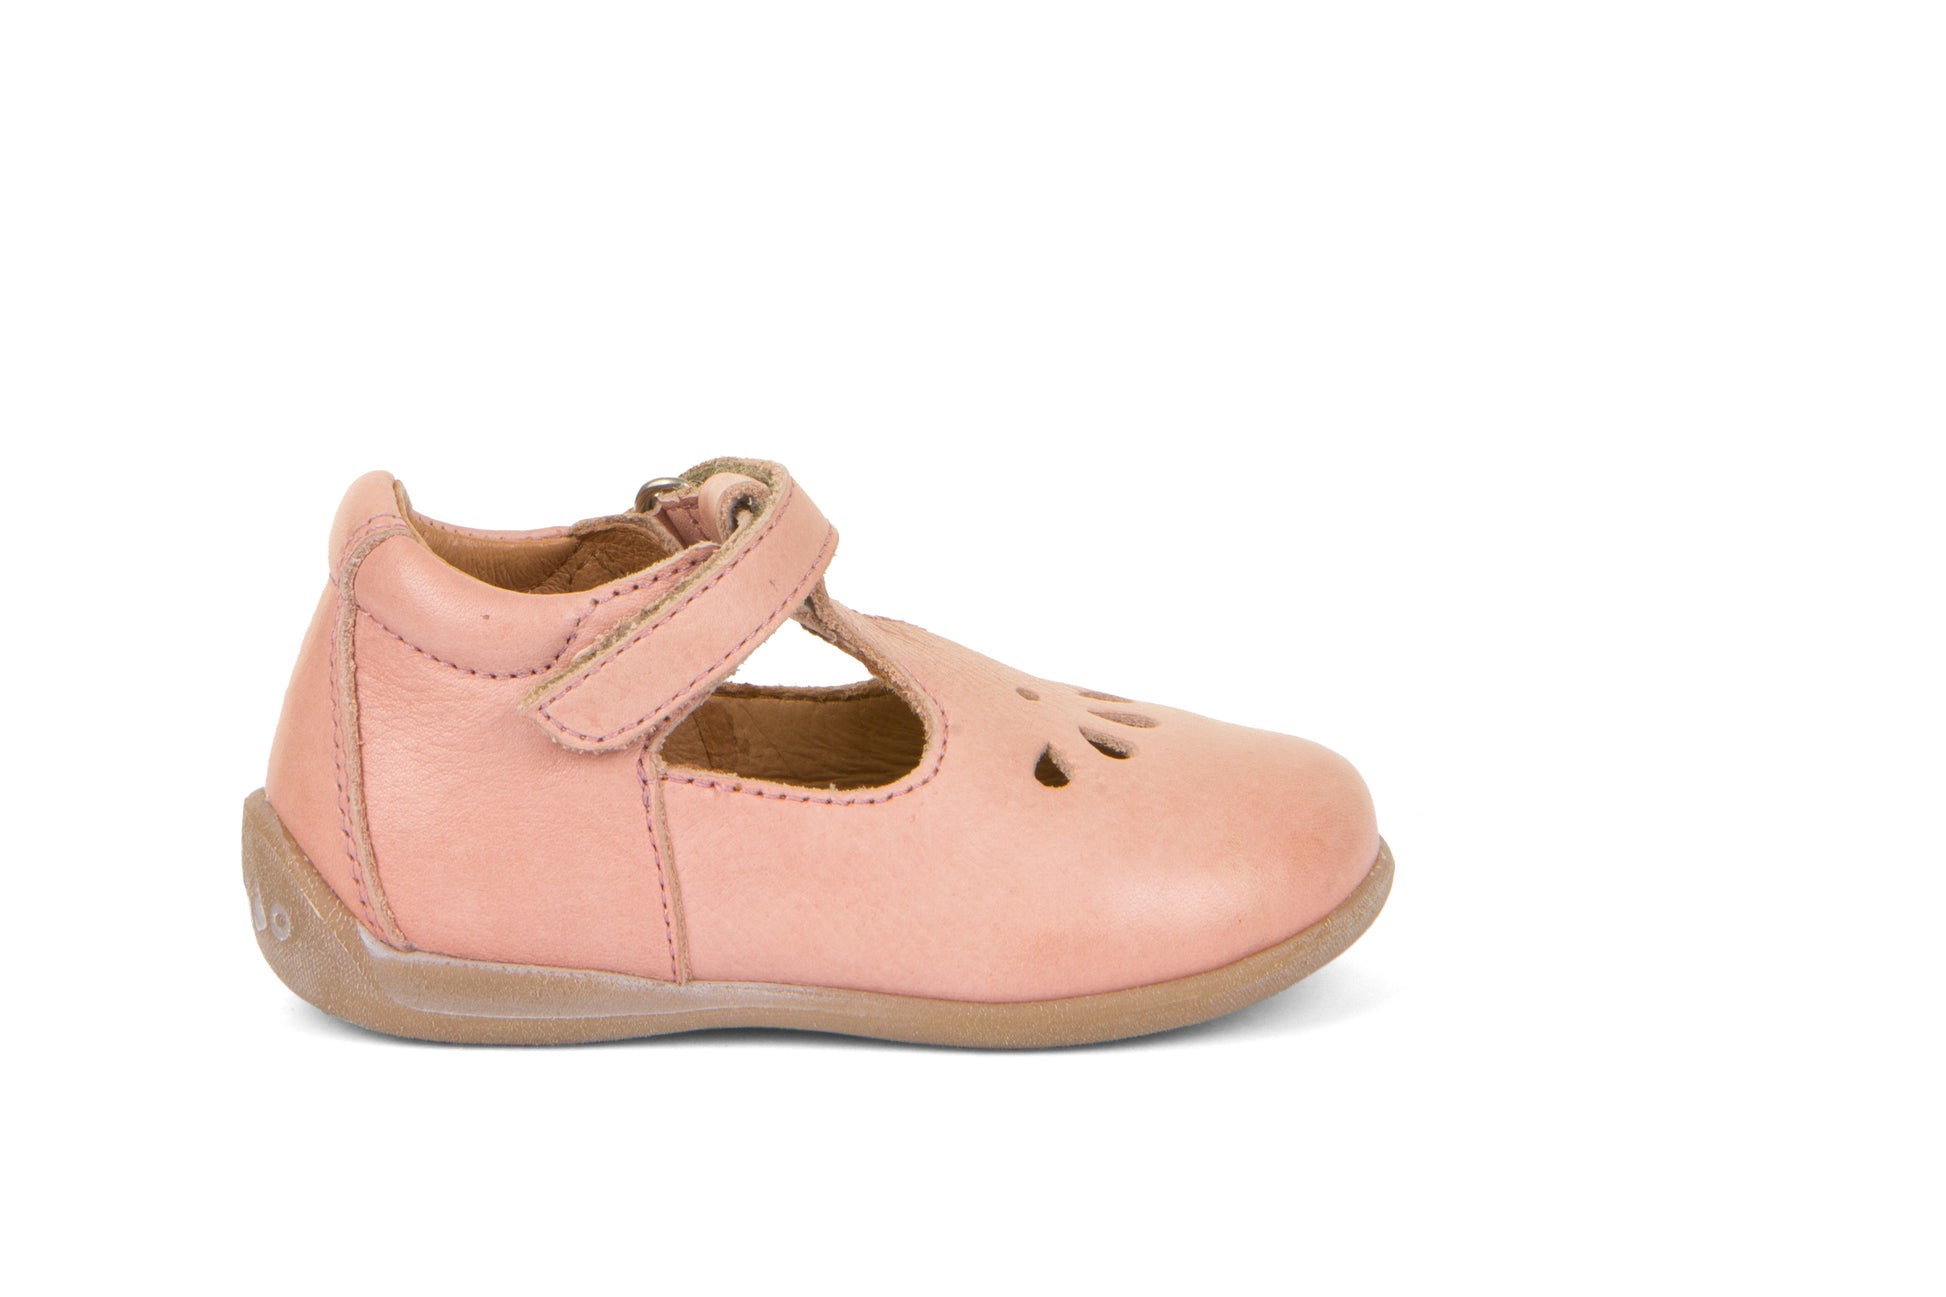 A girls t-bar shoe by Froddo, style G2140060-2 Gigi, in nude with teardrop cut out design, velcro fastening. Right side view. 